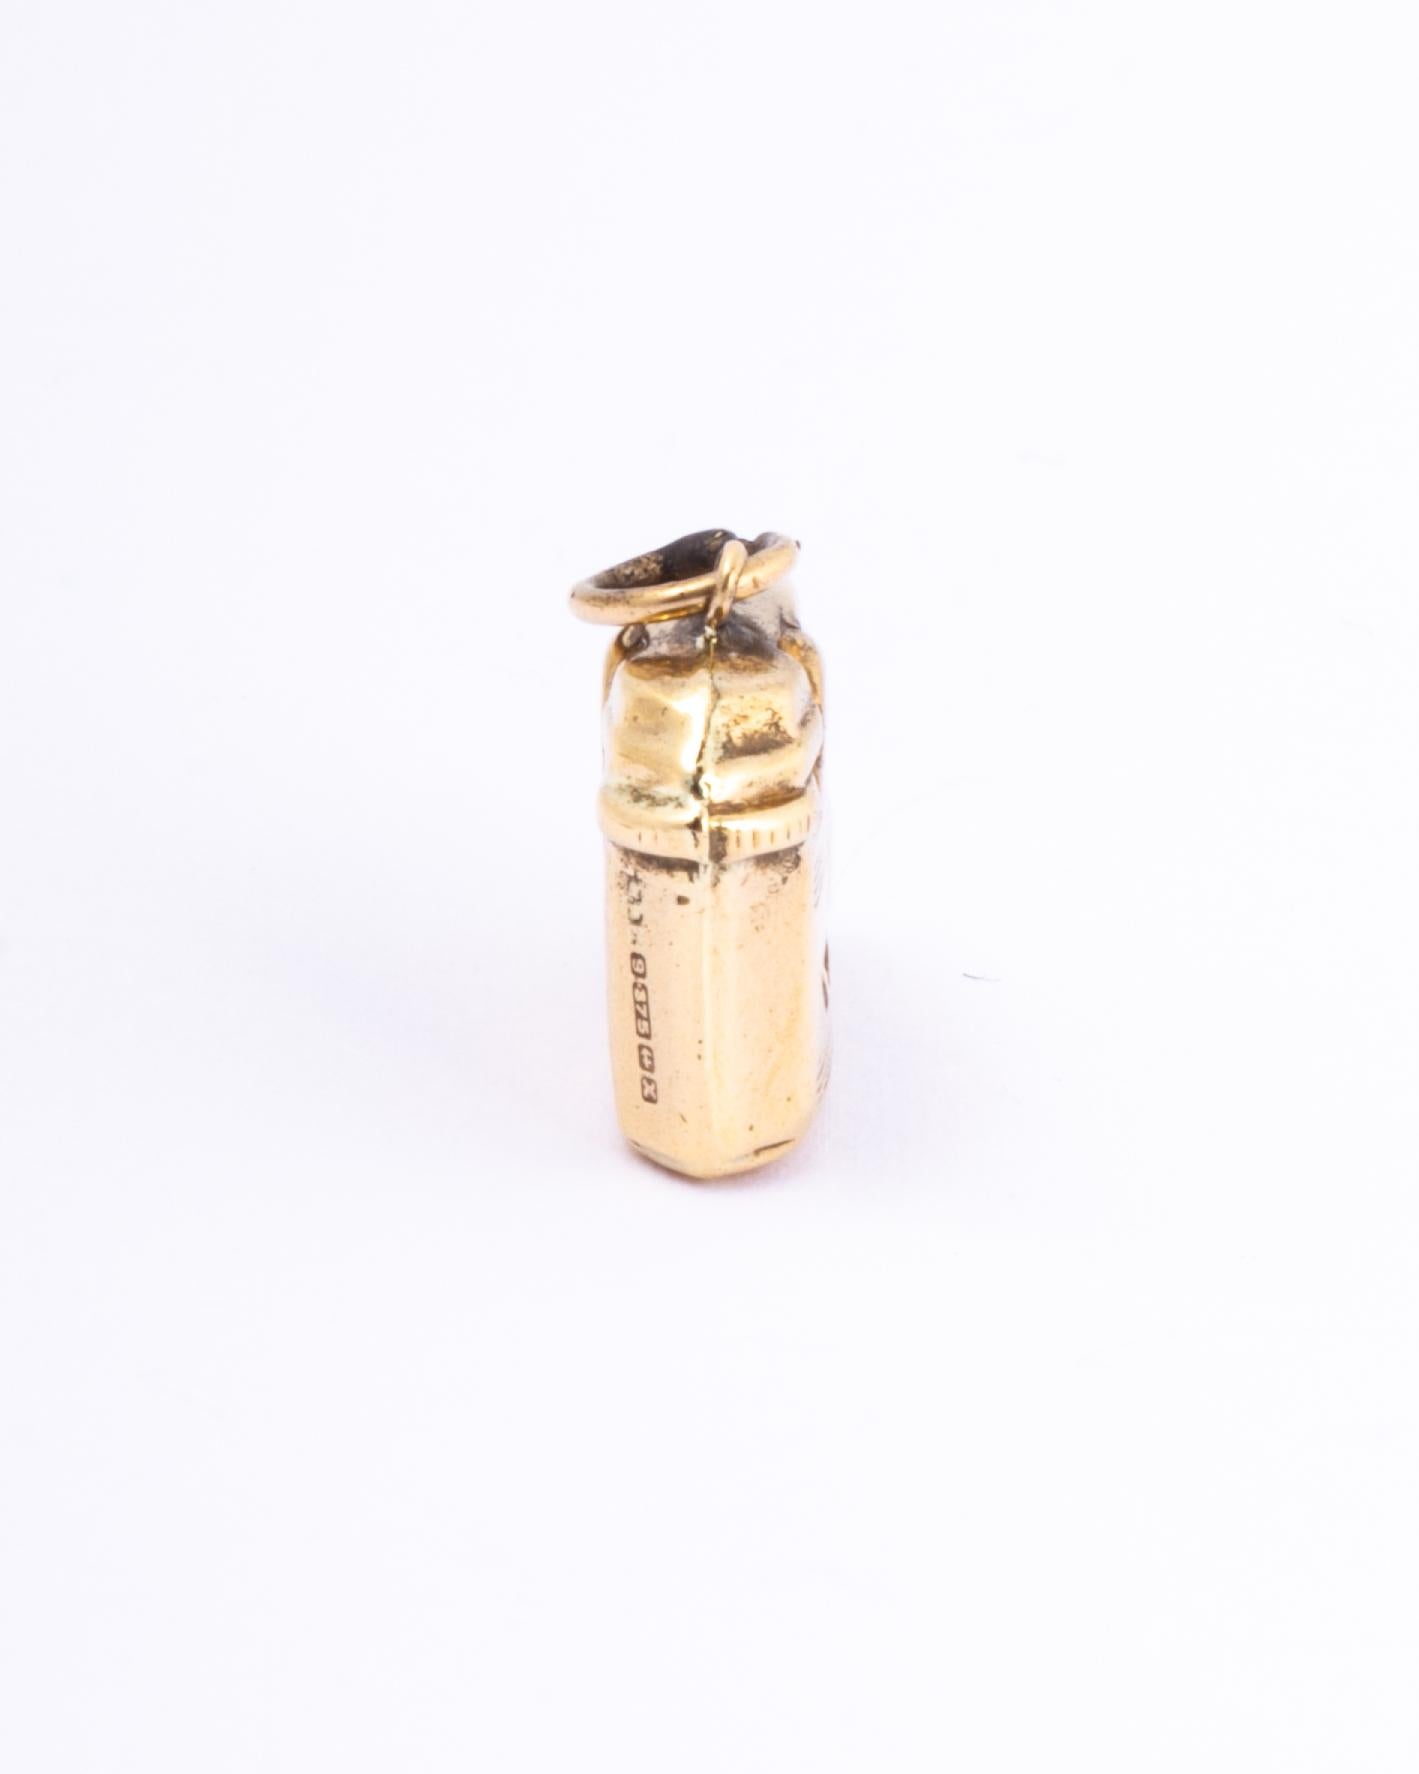 This charm is deigned with a dunhill lighter in mind. Modelled in 9ct gold and made in Birmingham, England.

Charm Dimensions: 17x12mm 

Weight: 1.3g